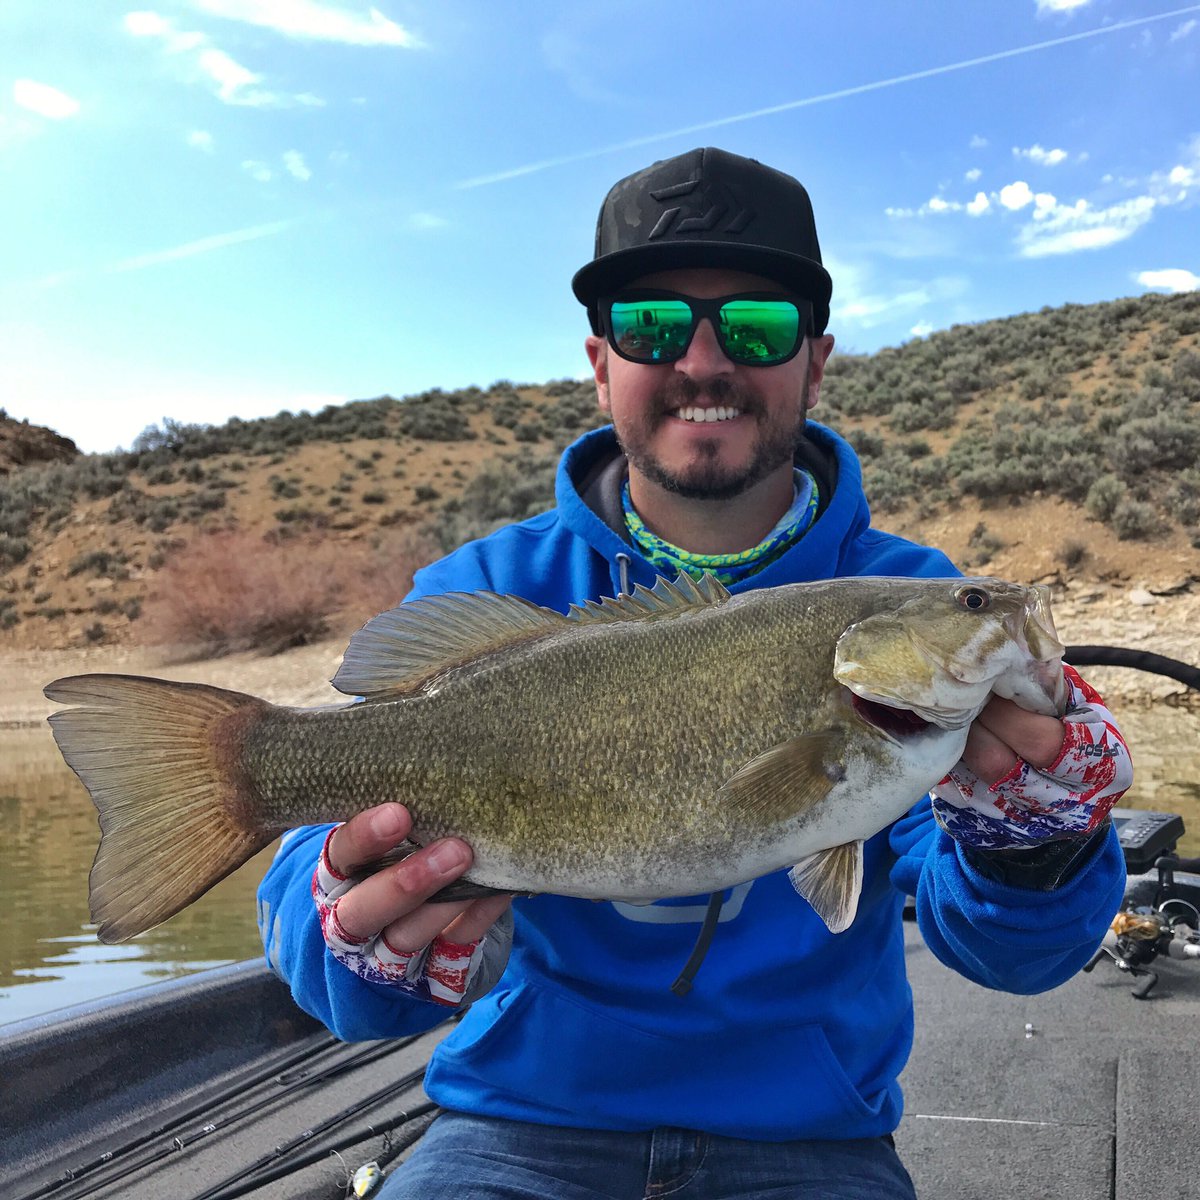 Just a quick bite between breakfast and lunch. #flaminggorge #bassfishing #wyoming #eliteanglr #fishmonkeygloves